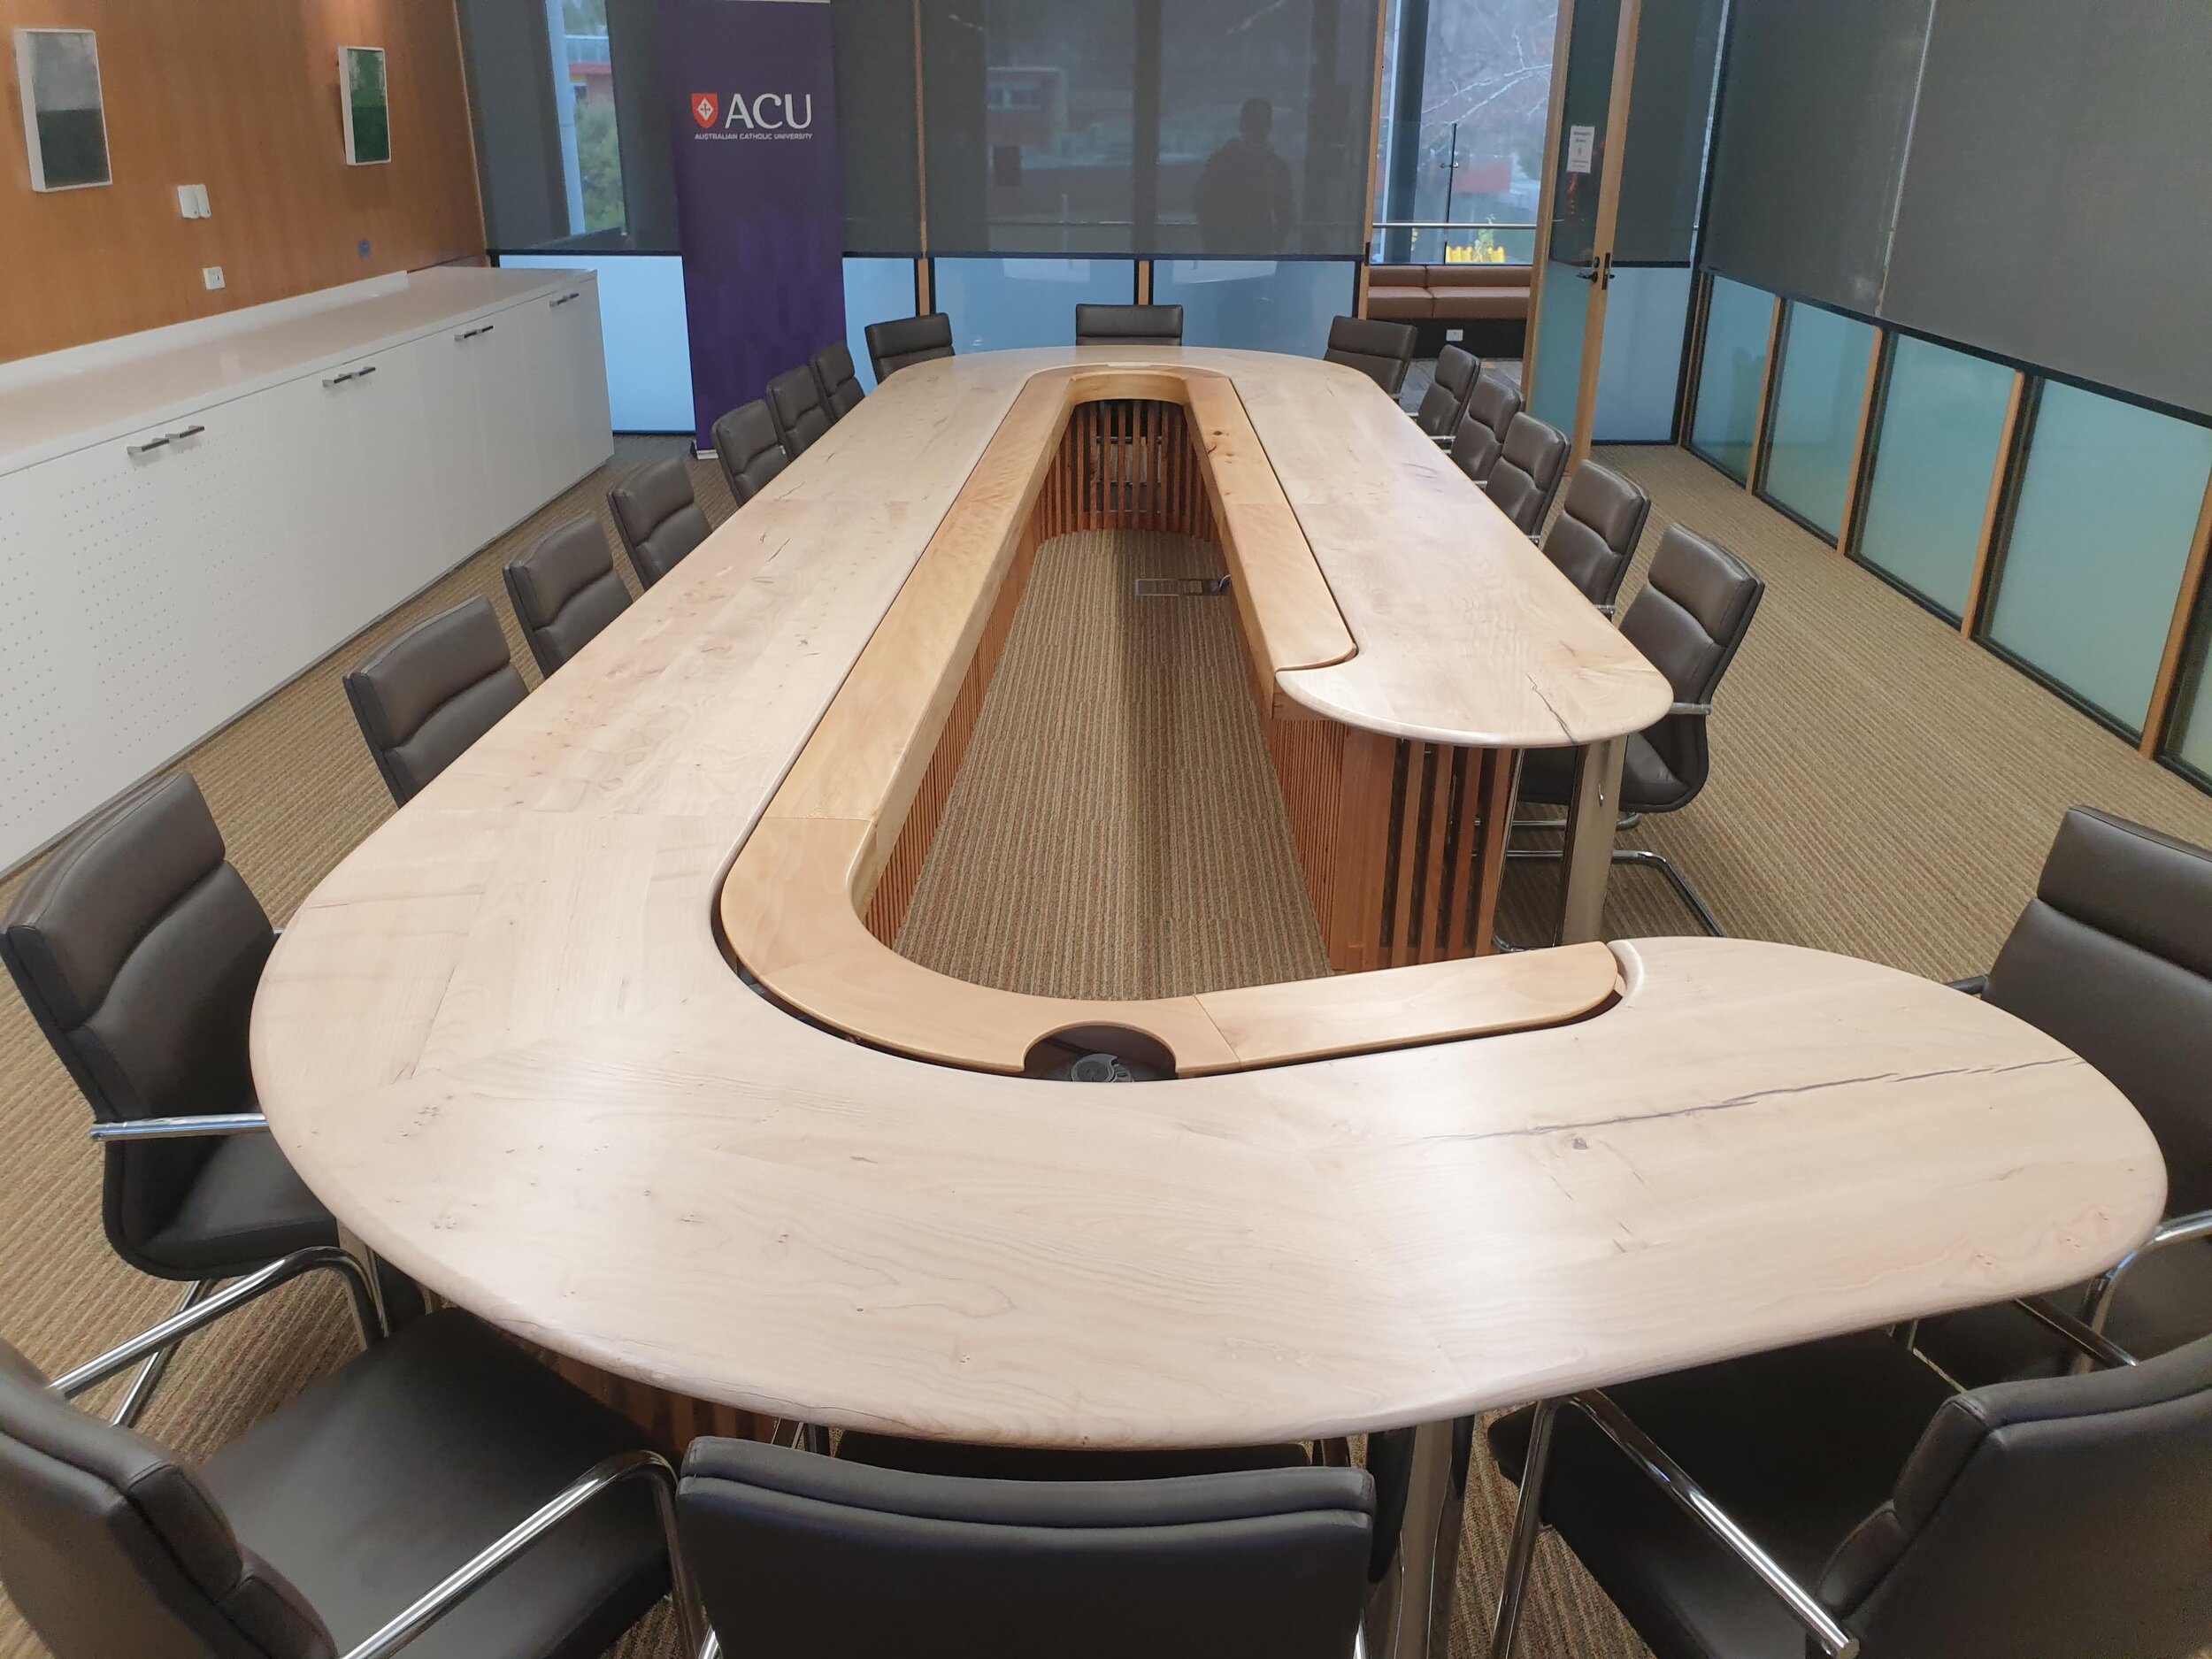  The completed boardroom table 